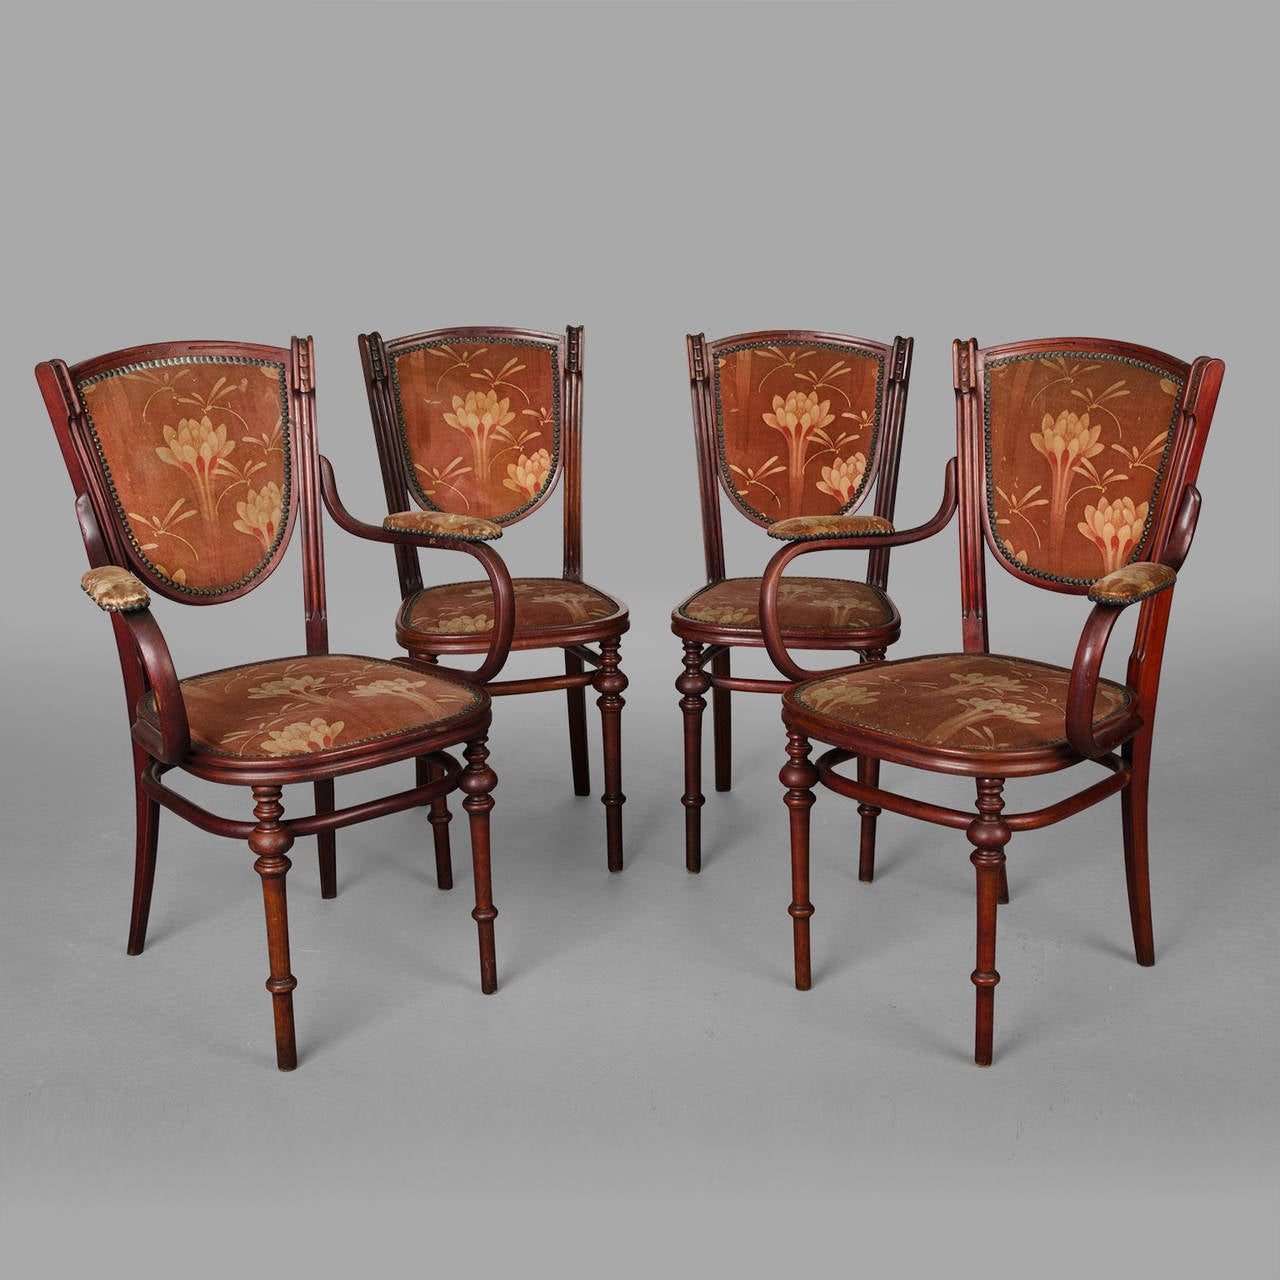 Set composed of two chairs and two armchairs in  bentwood, mahogany tainted beech. Original velvet tapestry, decorated with flowers and dragonflies in beautiful condition excepted the pronounced wear on the armrests.
 
Label under the seat of each